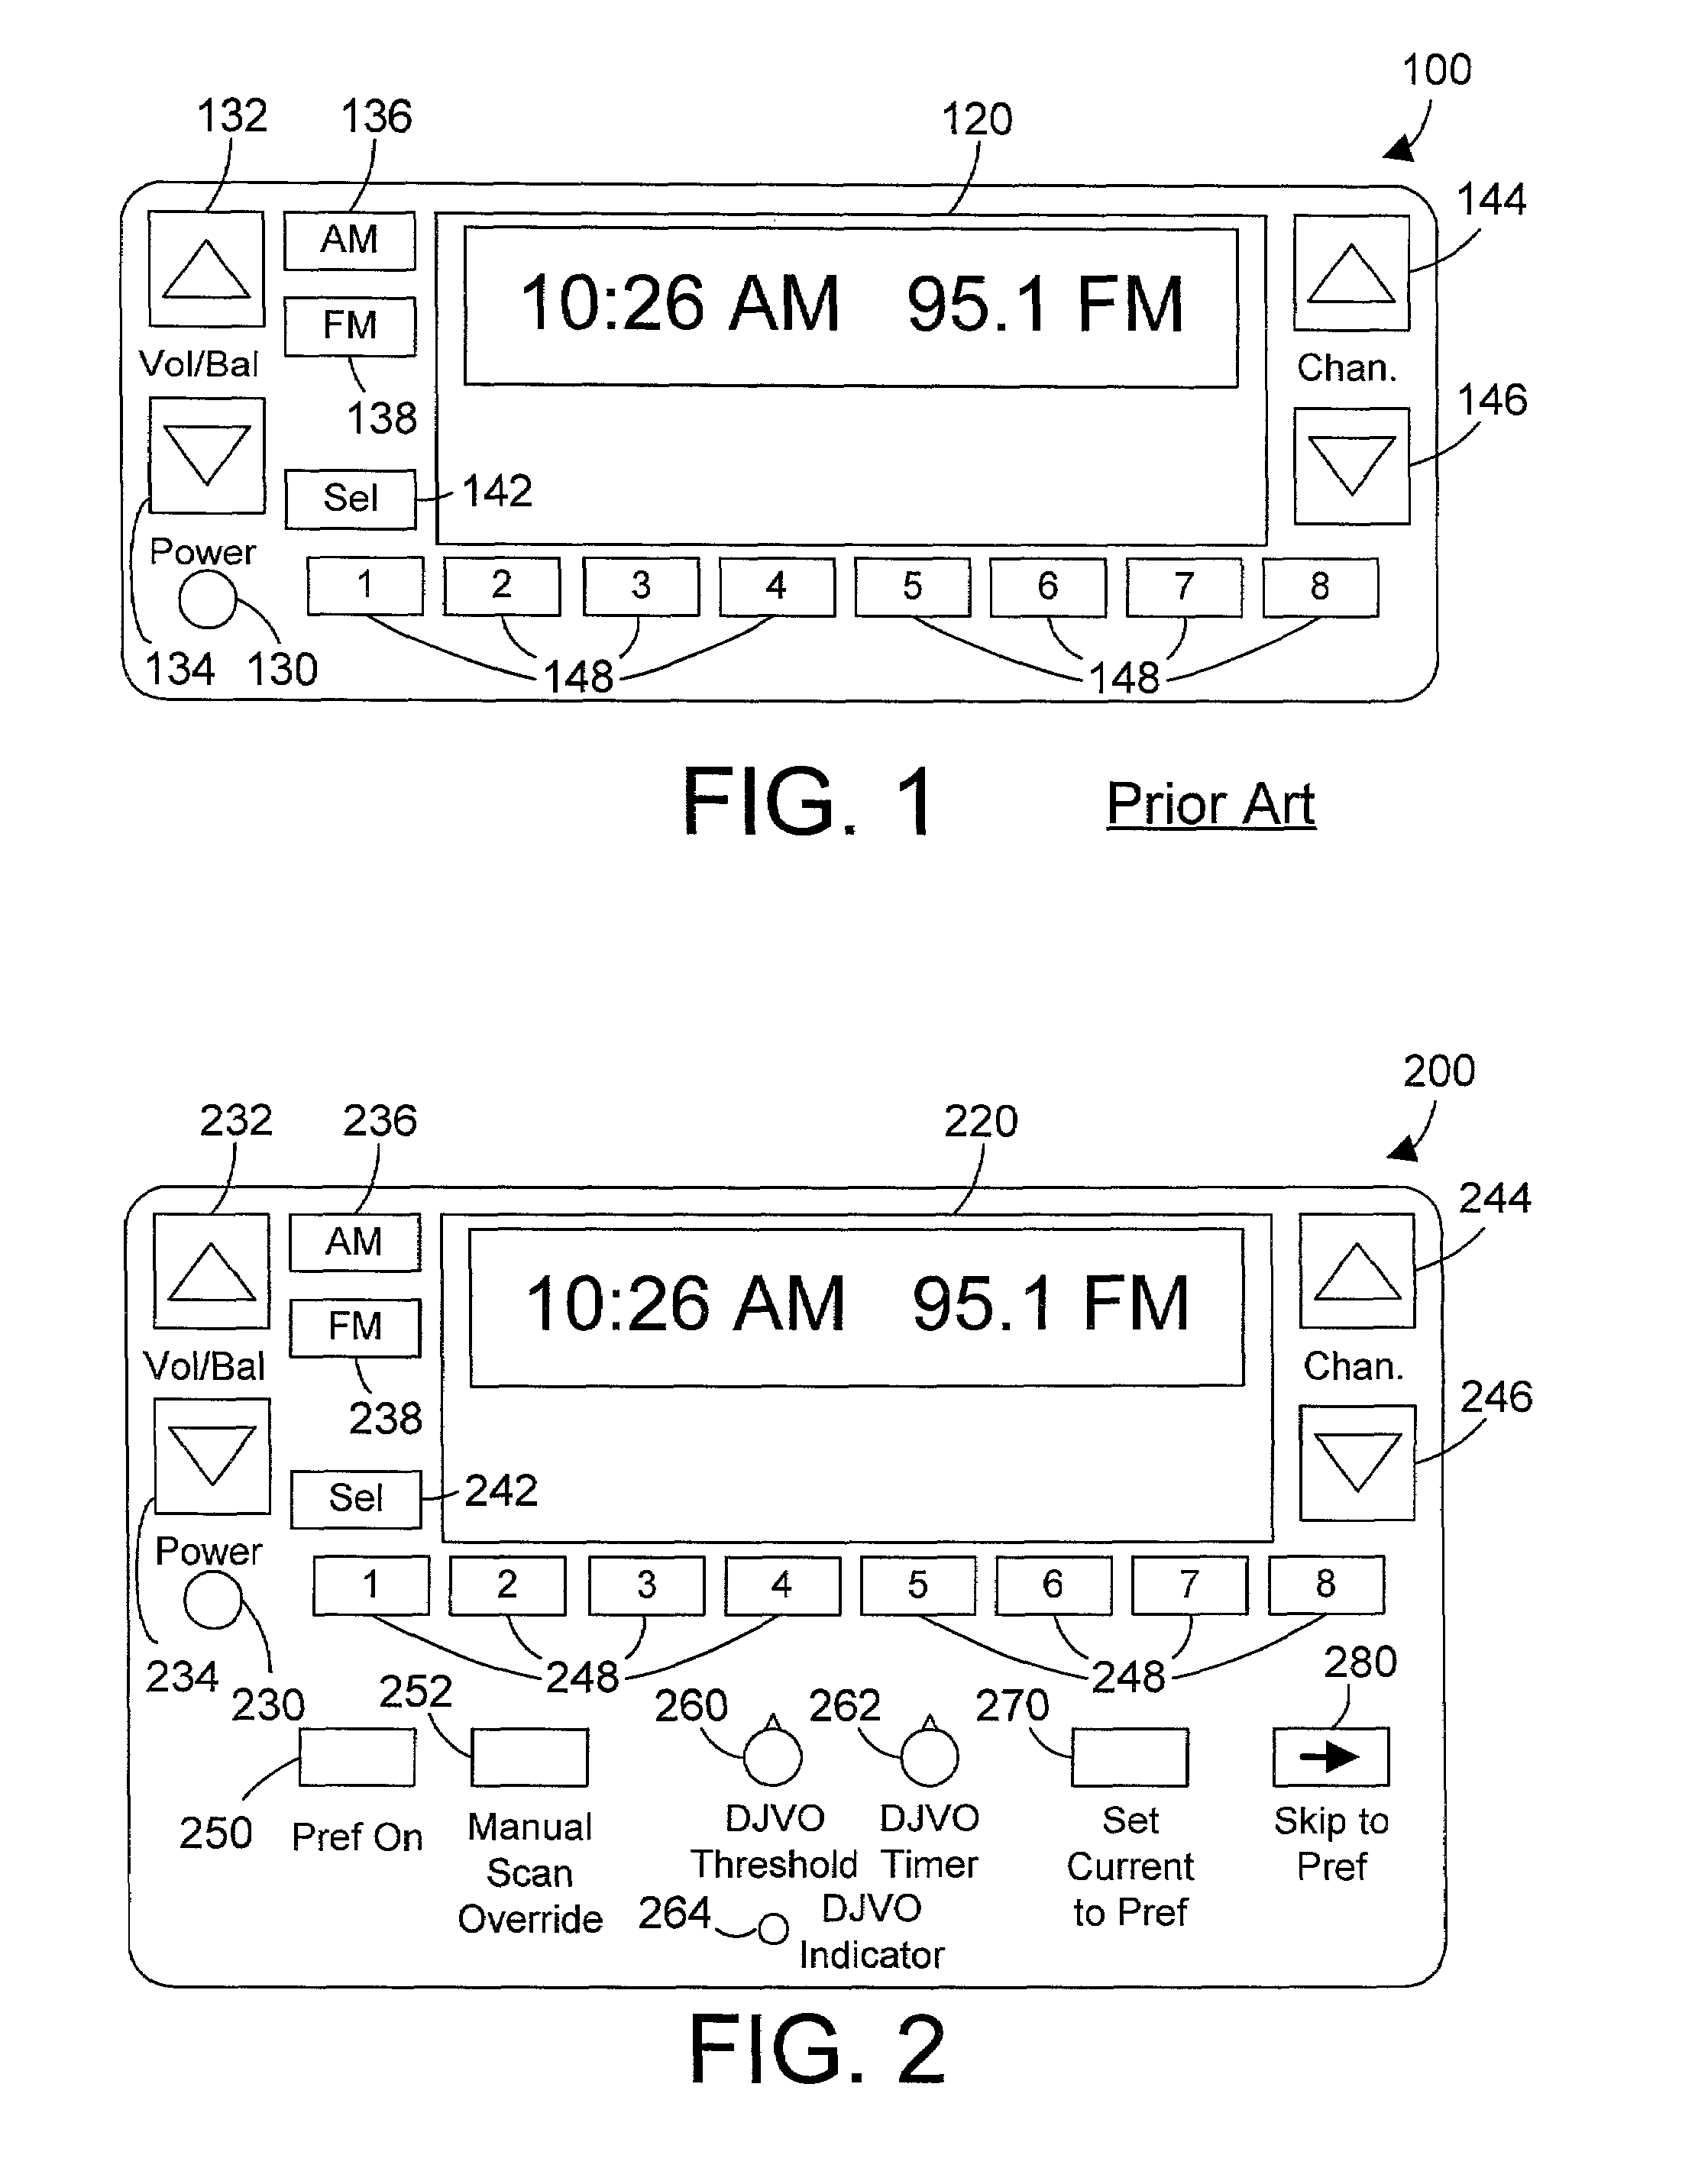 Radio receiver that changes function according to the output of an internal voice-only detector